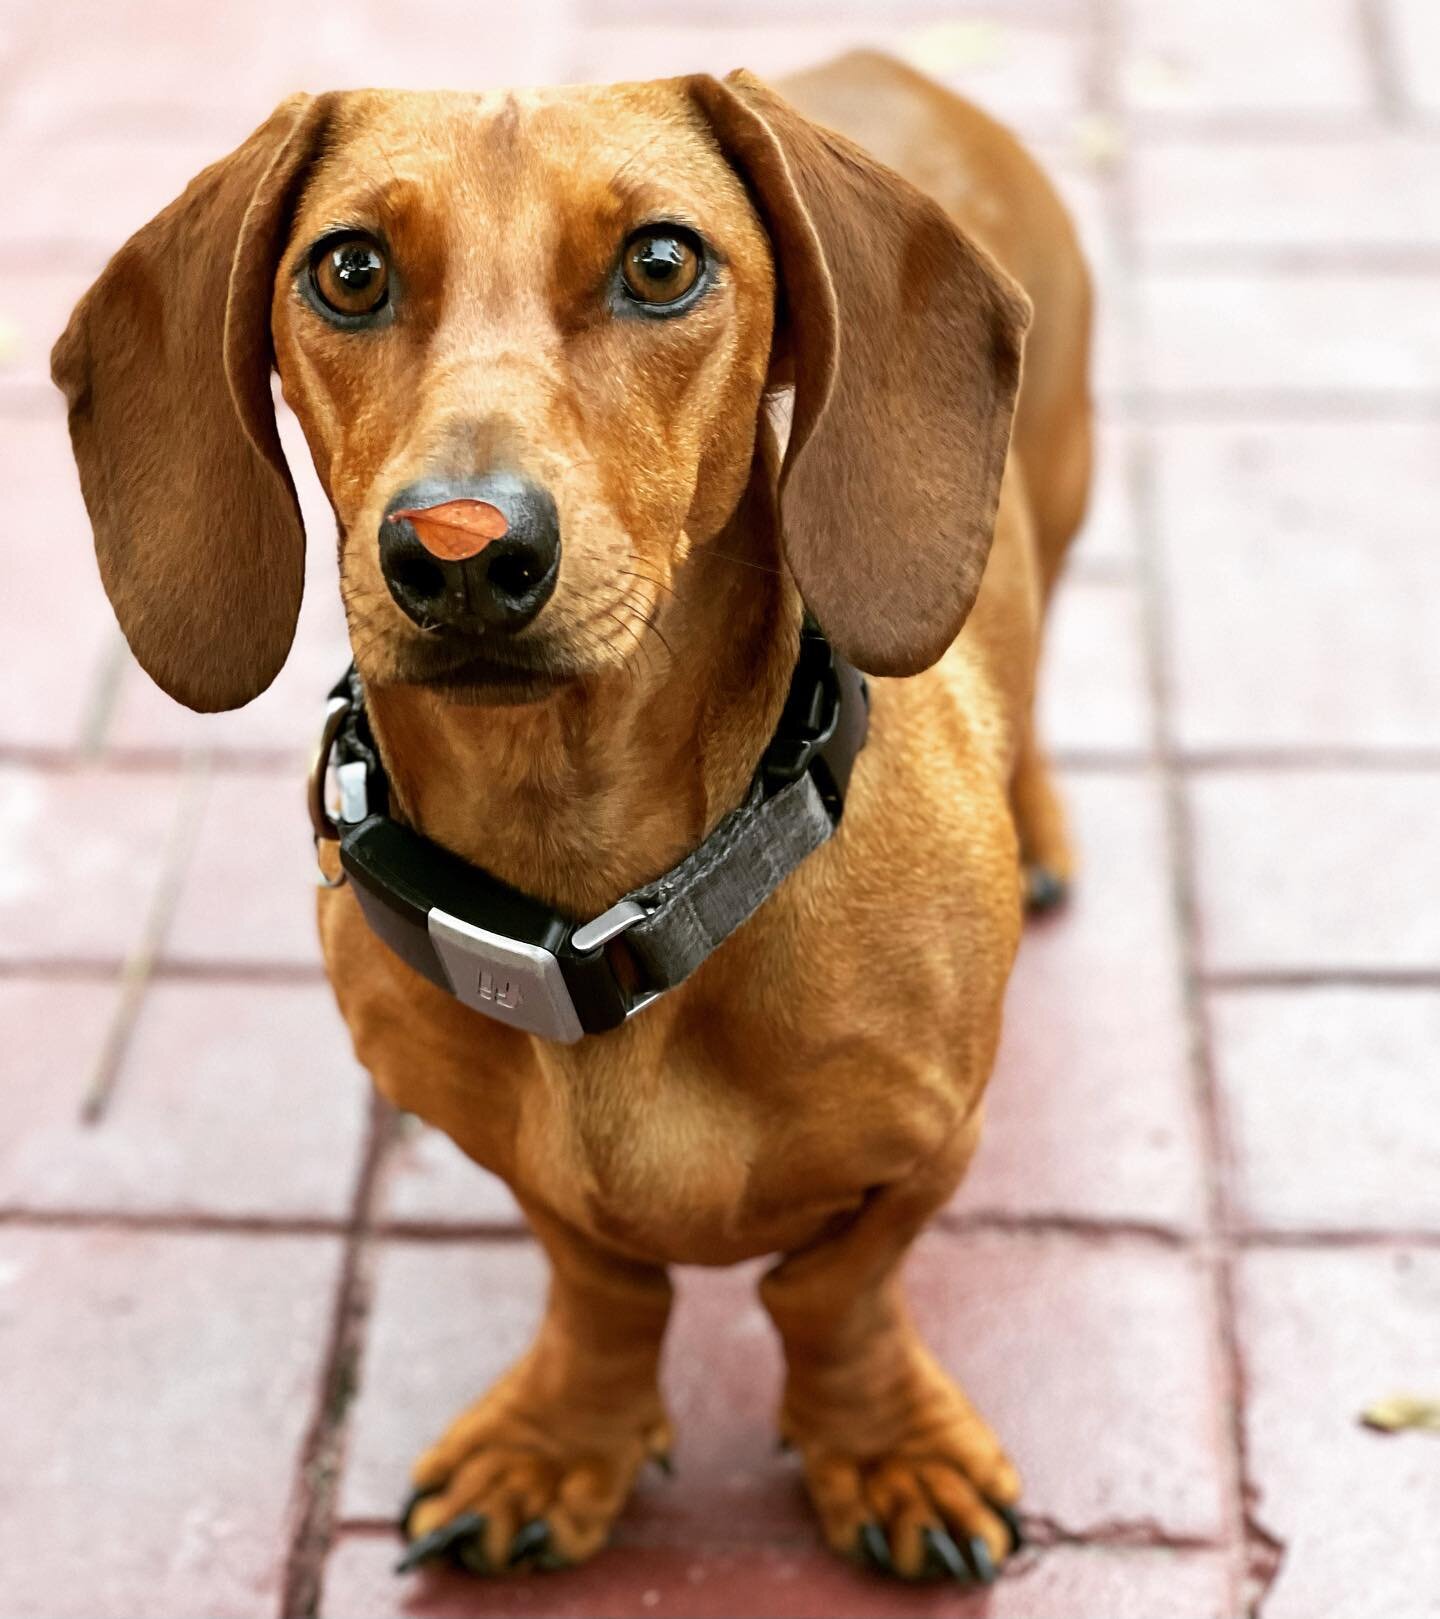 There is nothing greater than the sheer focus Layla has when there is something in your hand that she wants. #Dachshund #weinerdog #wienerdog #dachshundpuppy #puppy #dog #dogs #dogoftheday #dogsofinstagram #pet #pets #petsofinstagram #petsagram #layl